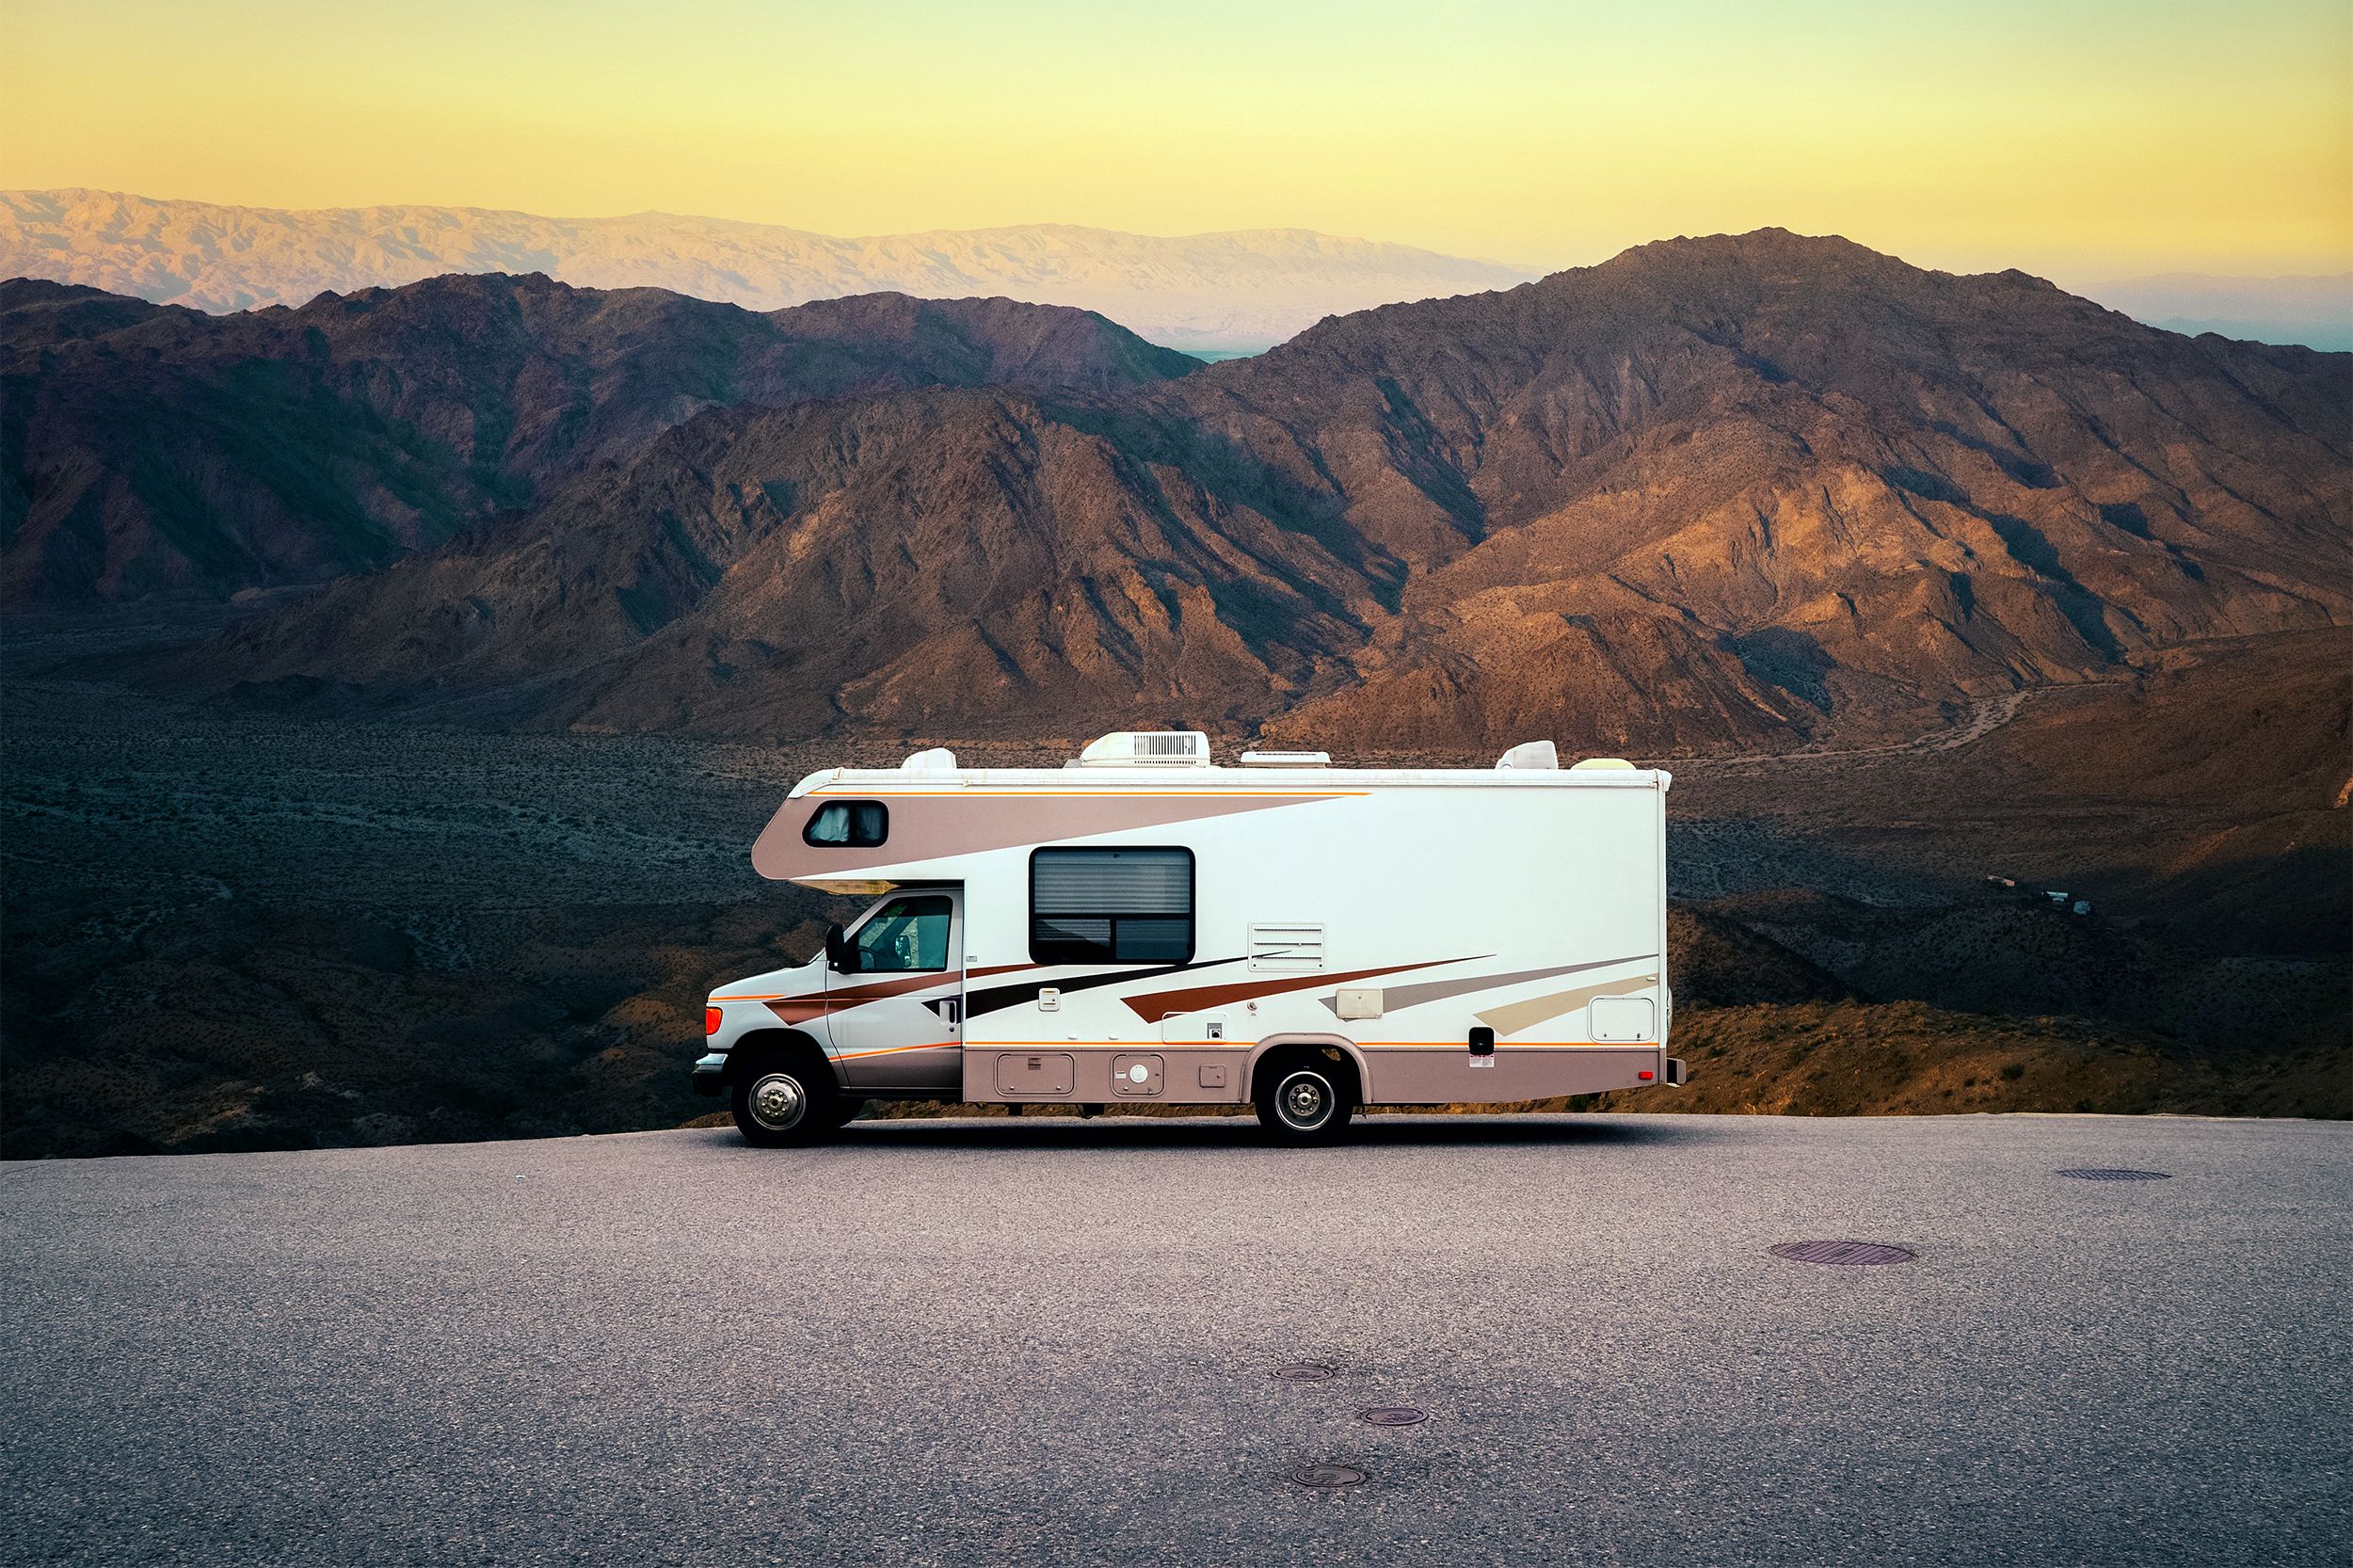 <p>Even pre-pandemic, the RV industry was experiencing consistent growth. In the eight years leading up to 2017, sales expanded each year. What’s more, according to <a href="https://www.rvia.org/rvs-move-america-economic-impact-study">a 2022 economic study</a> from the RV Industry Association, the recreational vehicle industry has hit a staggering $140 billion total economic impact in the U.S. annually, from RV sales to industry jobs to campgrounds and travel. <br> </p><p>Here’s a closer look at some of the little-known, colorful, or otherwise intriguing facts about the RV industry, culled from industry reports, association websites, and statistics research. <br><br>Curious to learn some RV lingo before you hit the road? Be sure to read Boondocking and Other RV Terms You Need to Know. </p>